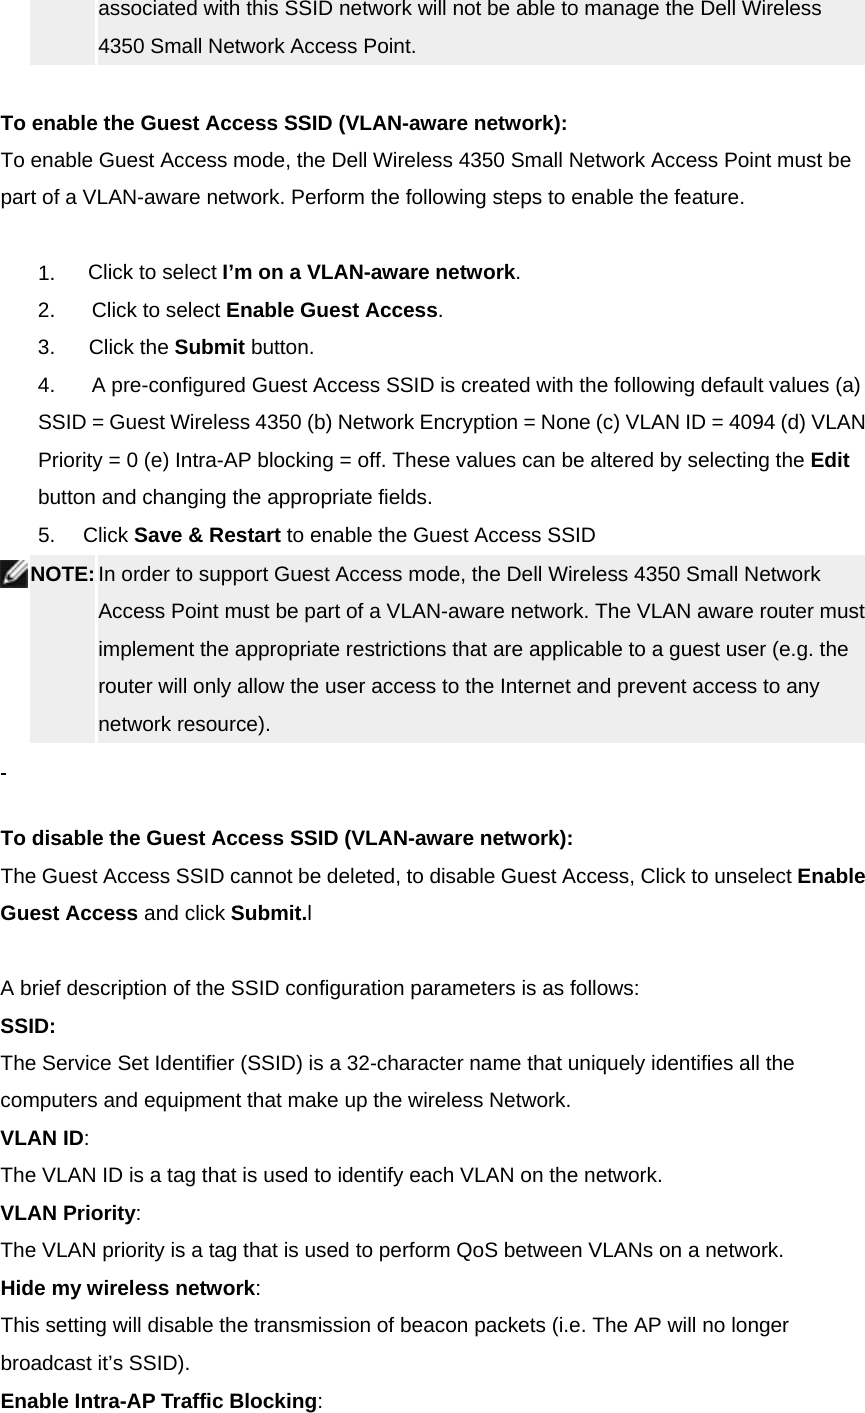 associated with this SSID network will not be able to manage the Dell Wireless 4350 Small Network Access Point.     To enable the Guest Access SSID (VLAN-aware network): To enable Guest Access mode, the Dell Wireless 4350 Small Network Access Point must be part of a VLAN-aware network. Perform the following steps to enable the feature.       1.         Click to select I’m on a VLAN-aware network. 2.          Click to select Enable Guest Access.  3.      Click the Submit button. 4.          A pre-configured Guest Access SSID is created with the following default values (a) SSID = Guest Wireless 4350 (b) Network Encryption = None (c) VLAN ID = 4094 (d) VLAN Priority = 0 (e) Intra-AP blocking = off. These values can be altered by selecting the Edit button and changing the appropriate fields. 5.     Click Save &amp; Restart to enable the Guest Access SSID  NOTE: In order to support Guest Access mode, the Dell Wireless 4350 Small Network Access Point must be part of a VLAN-aware network. The VLAN aware router must implement the appropriate restrictions that are applicable to a guest user (e.g. the router will only allow the user access to the Internet and prevent access to any network resource).       To disable the Guest Access SSID (VLAN-aware network): The Guest Access SSID cannot be deleted, to disable Guest Access, Click to unselect Enable Guest Access and click Submit.l    A brief description of the SSID configuration parameters is as follows: SSID:      The Service Set Identifier (SSID) is a 32-character name that uniquely identifies all the computers and equipment that make up the wireless Network. VLAN ID:        The VLAN ID is a tag that is used to identify each VLAN on the network. VLAN Priority:      The VLAN priority is a tag that is used to perform QoS between VLANs on a network. Hide my wireless network:    This setting will disable the transmission of beacon packets (i.e. The AP will no longer broadcast it’s SSID). Enable Intra-AP Traffic Blocking:    